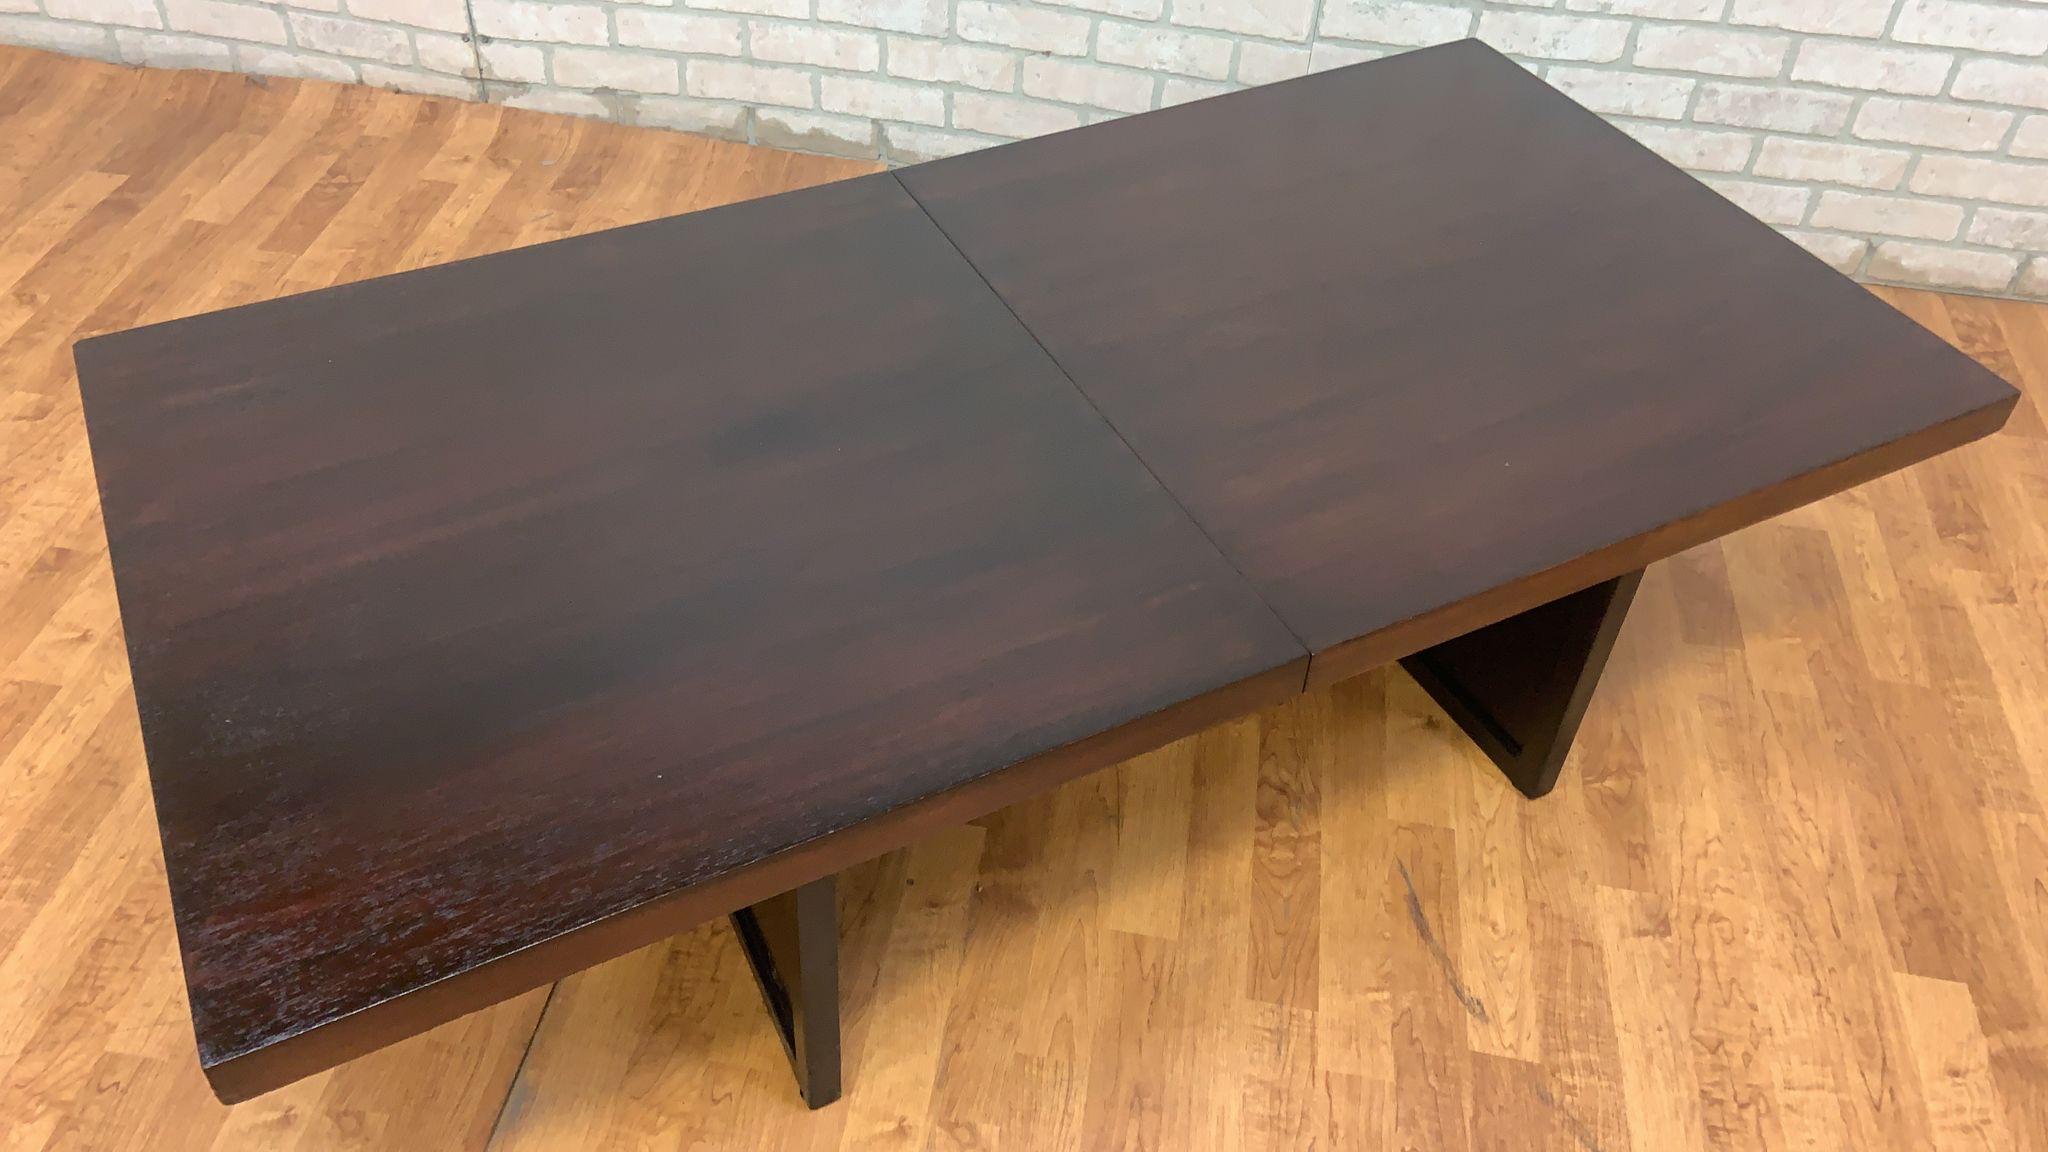 Mid Century Modern John Keal Style Walnut Expanding Coffee Table

Mid century modern unique rectangular expanding walnut coffee table styled after John Keal is both handsome and versatile. This table expands from 60 inches wide when closed to 81.5